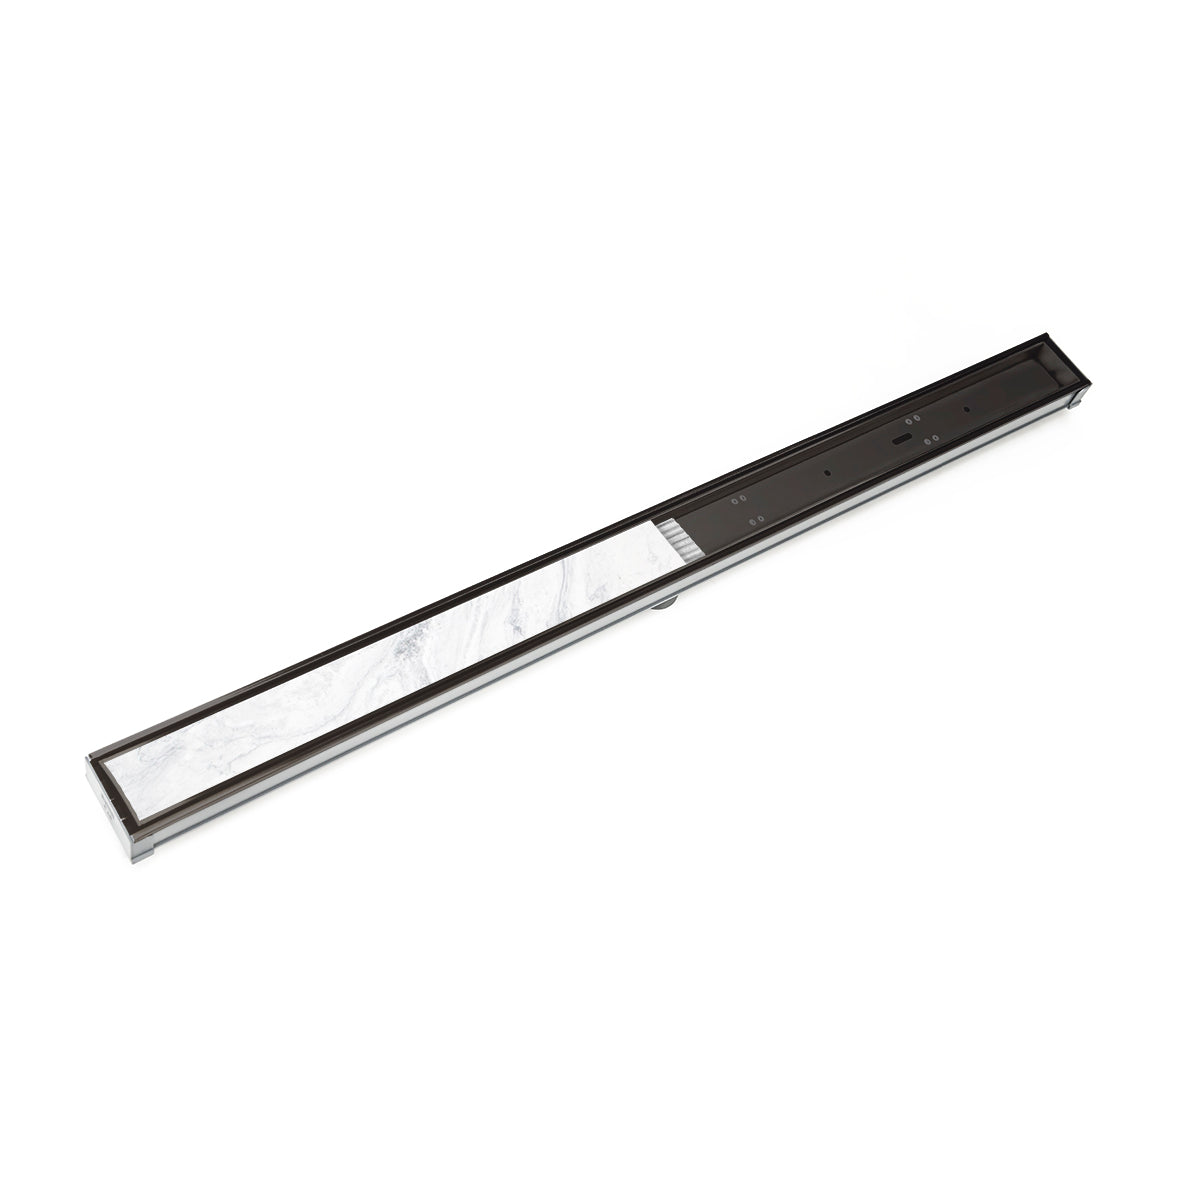 Infinity Drain 60" S-PVC Series Low Profile Site Sizable Linear Drain Kit with 2 1/2" Tile Insert Frame